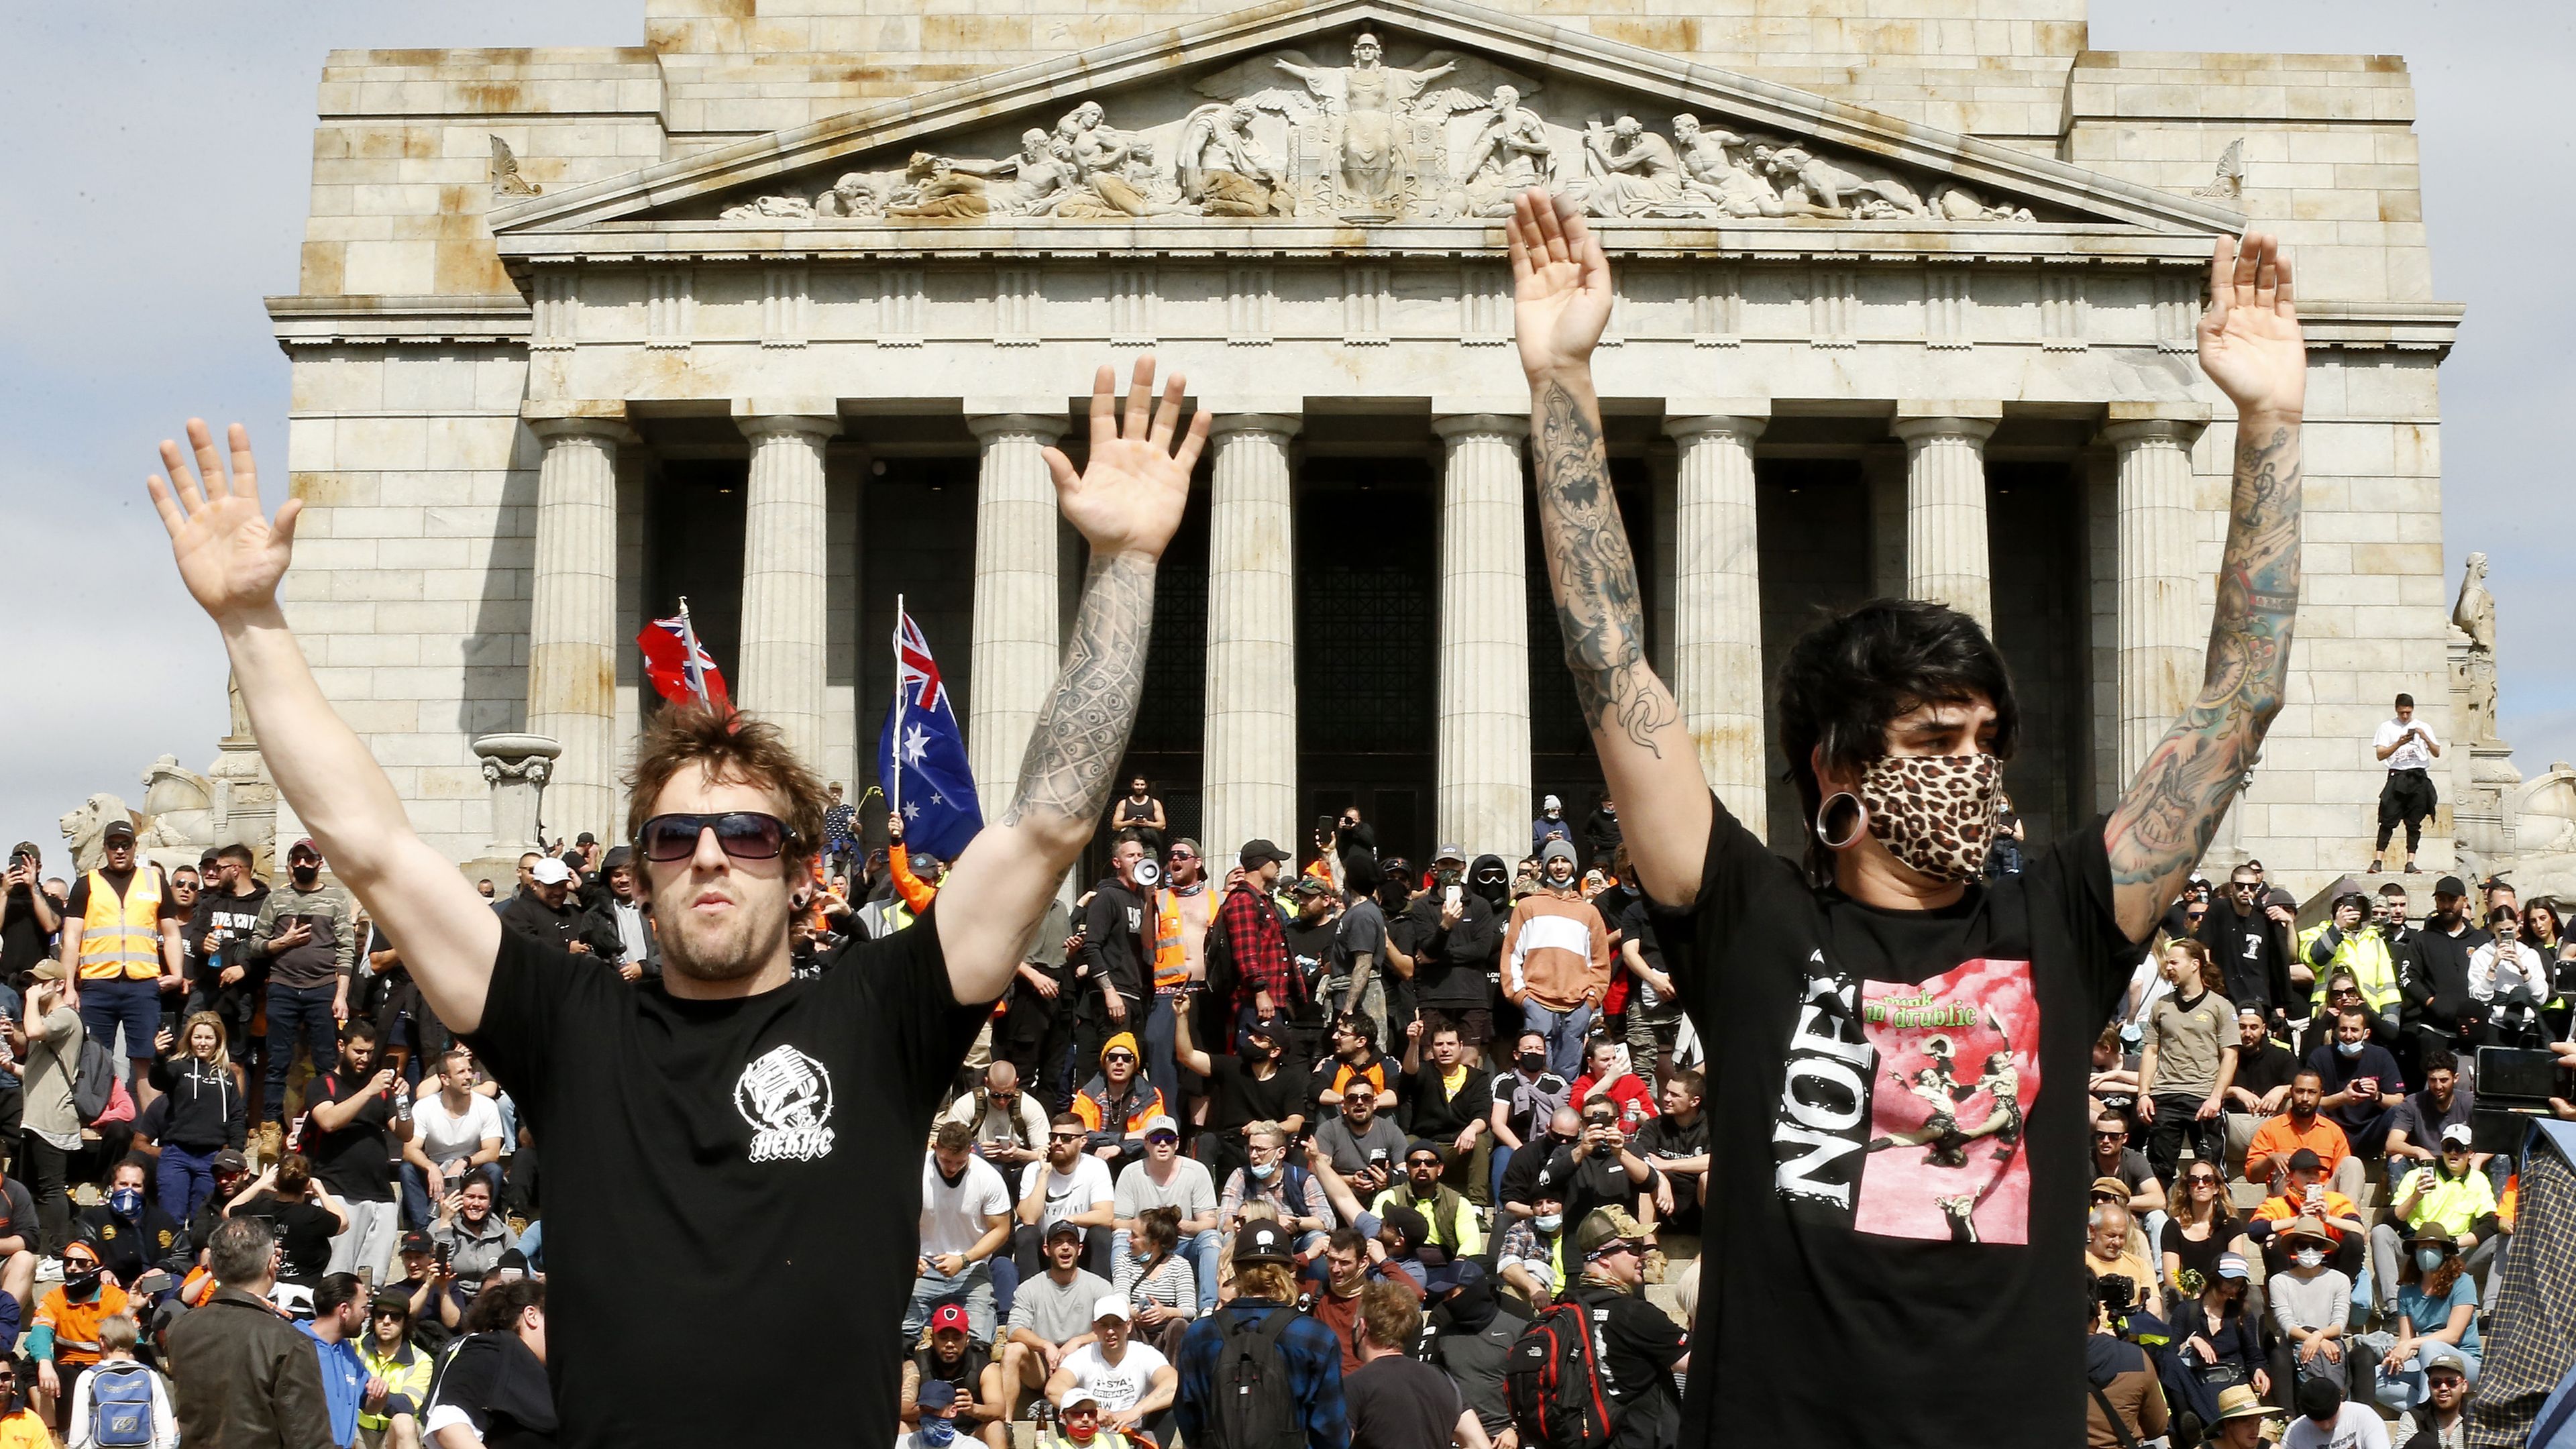 Richmond, Demons blast 'disgusting' protests at Melbourne's Shrine of Remembrance